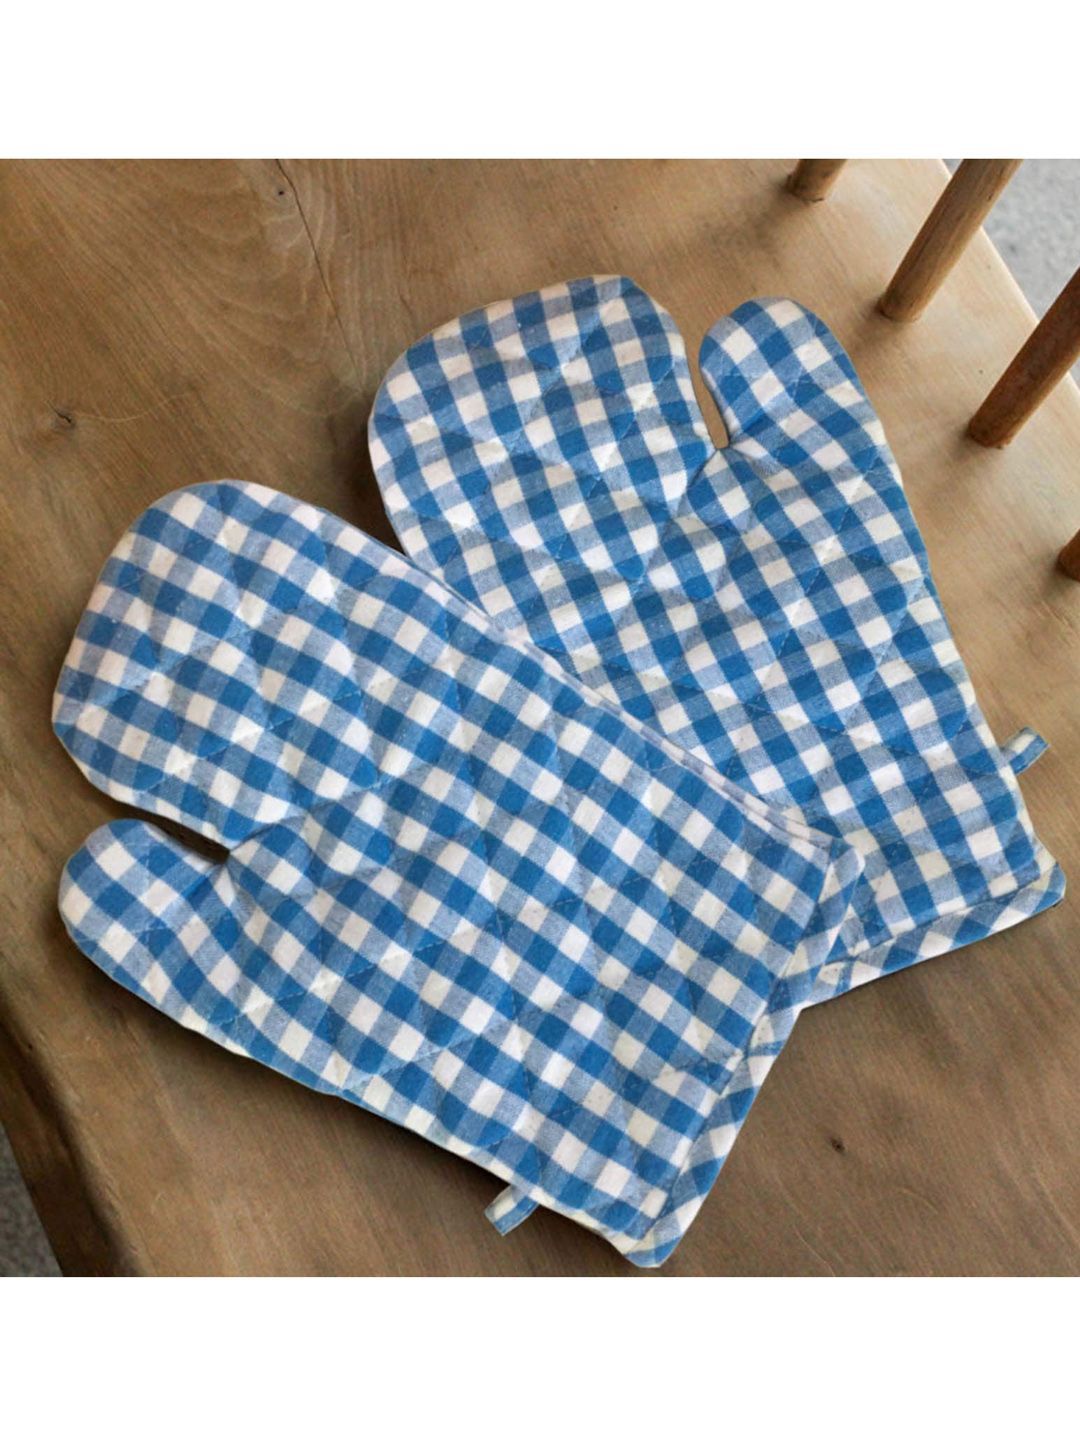 Lushomes Women Set Of 2 Checked Oven Gloves Price in India